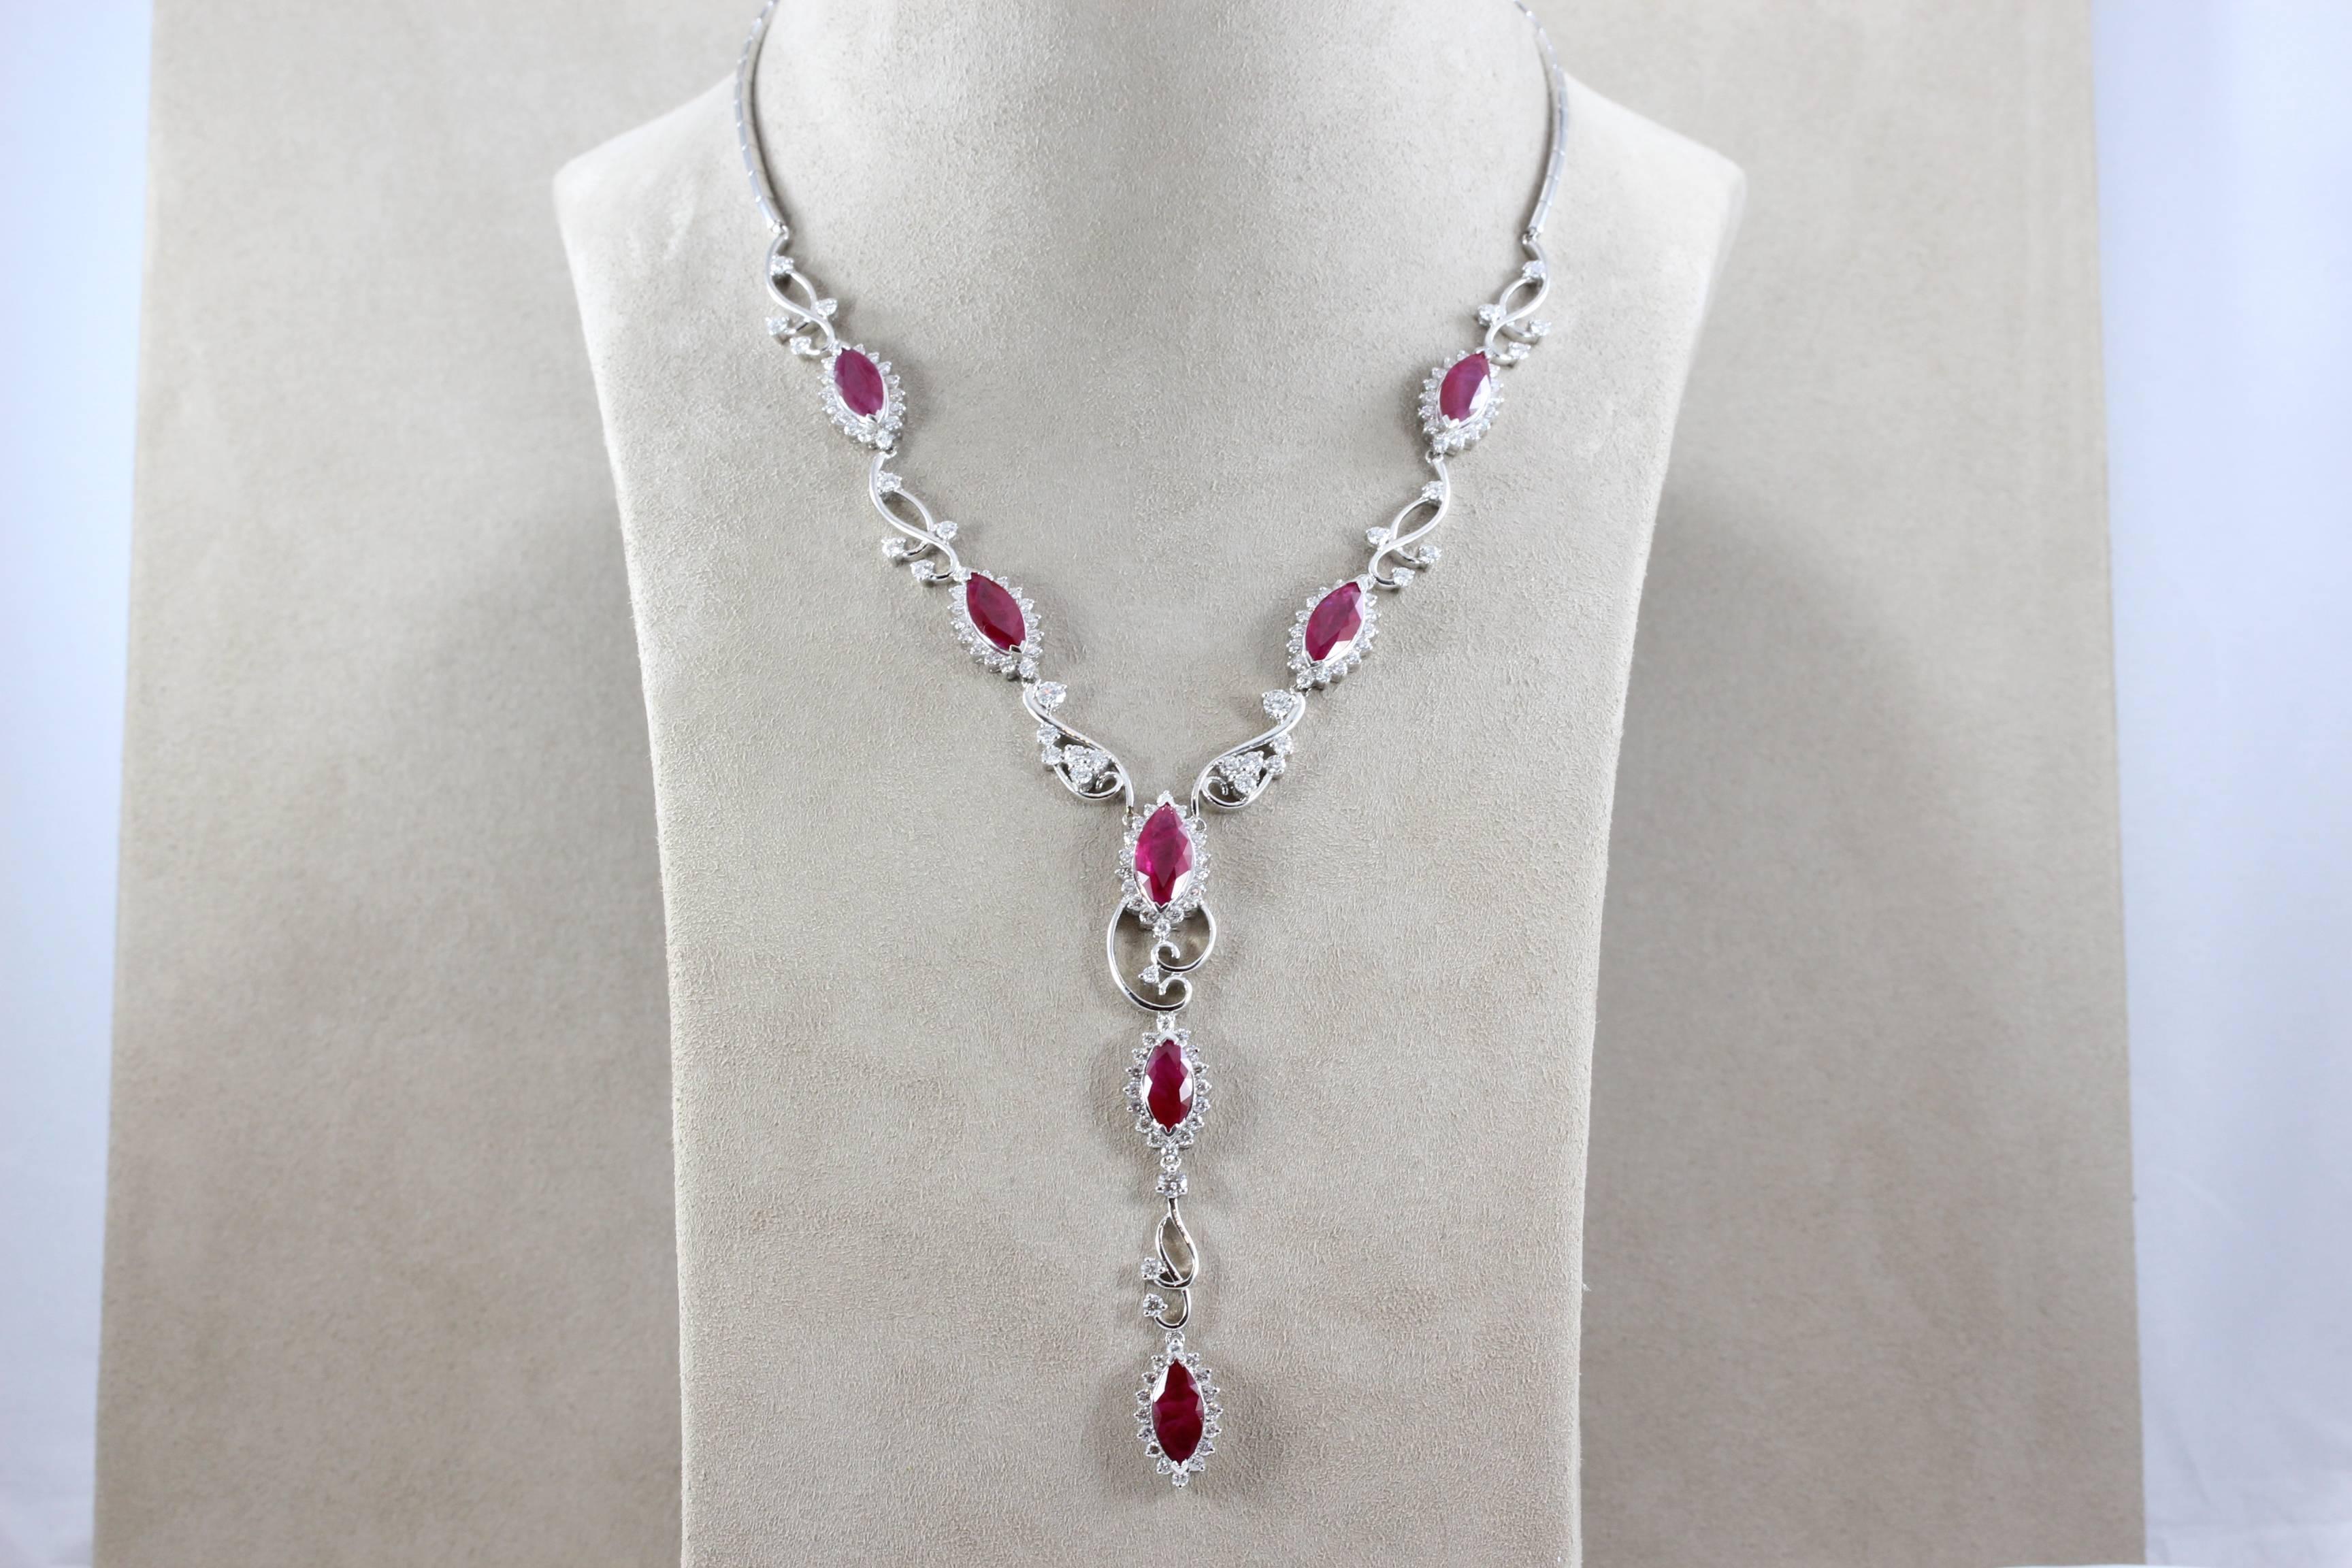 A sexy gold necklace featuring 7 large marquise shape rubies weight about 2 carats each. There are over 5 carats of VS quality diamonds set in 18K white gold which accent the vivid red ruby. A necklace to match the perfect outfit. 

Necklace Length: